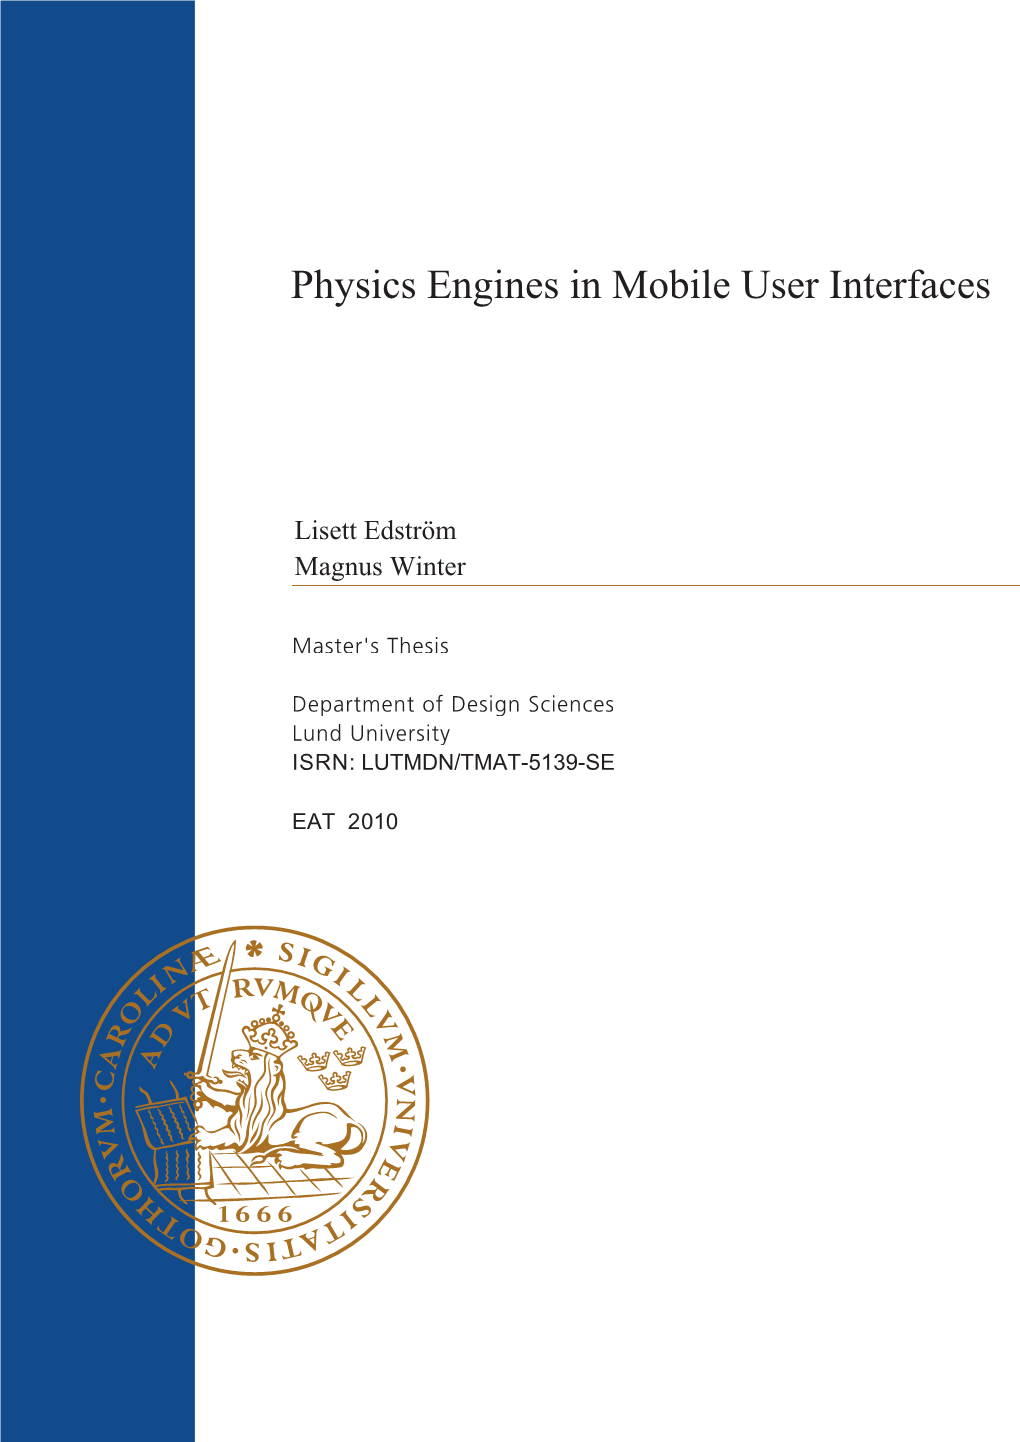 Physics Engines in Mobile User Interfaces